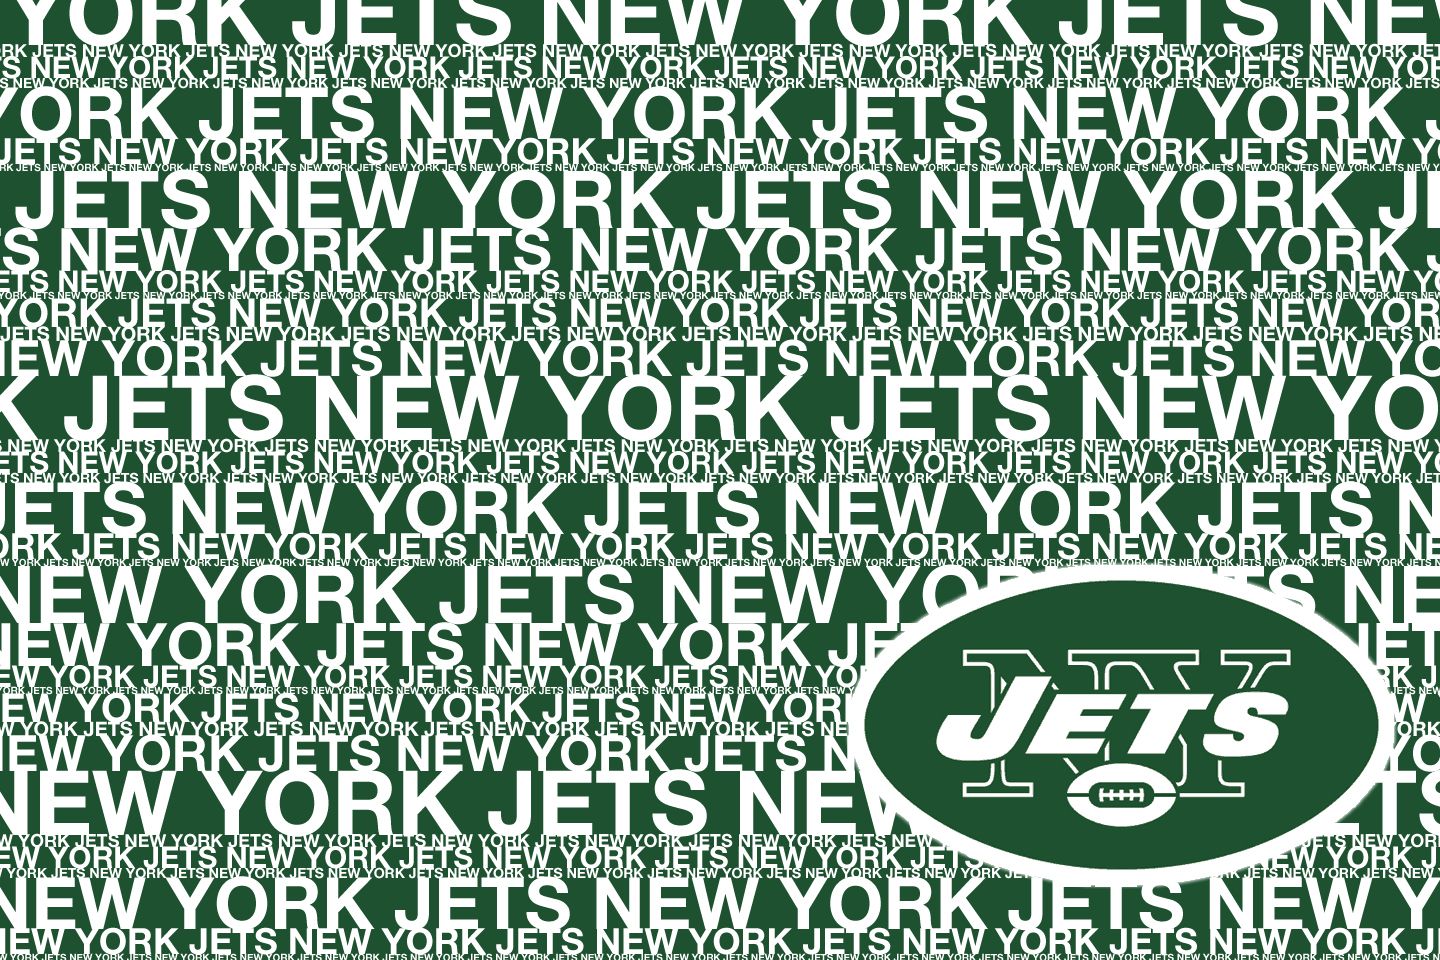 Amazing New York Jets Wallpaper Full HD Pictures